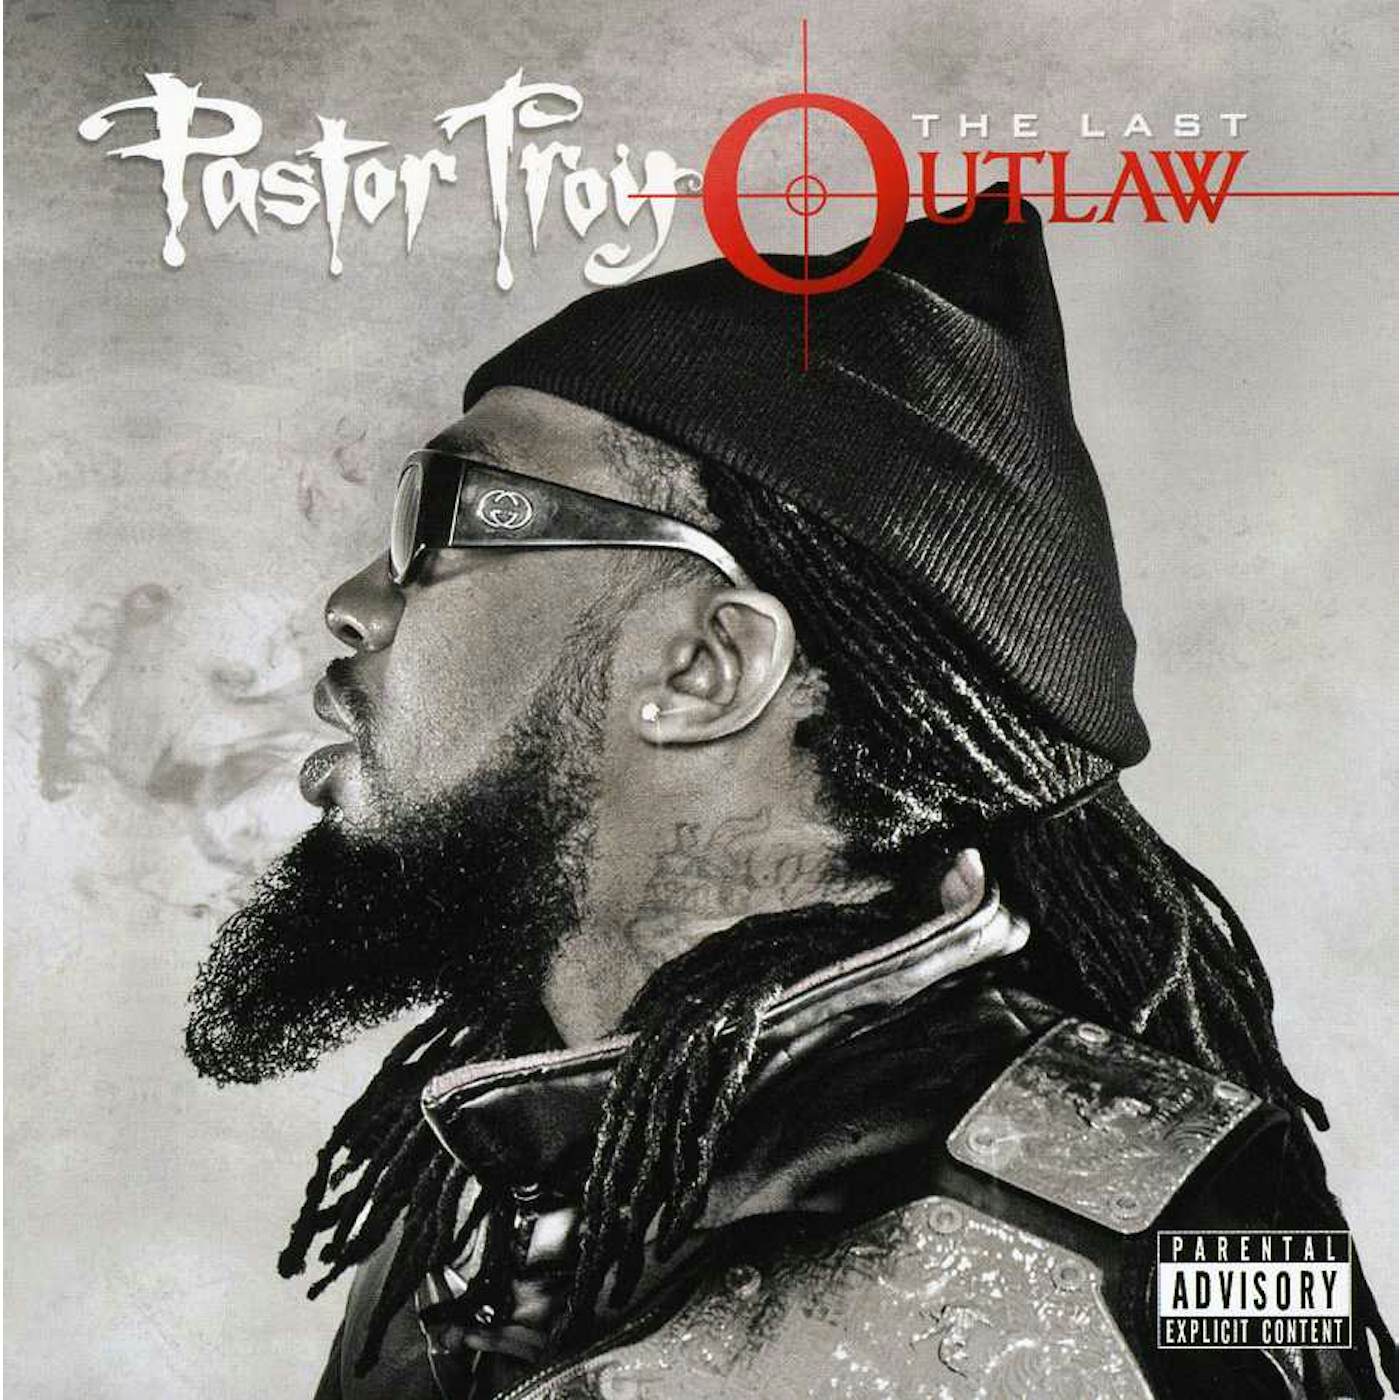 Pastor Troy OUTLAW CD